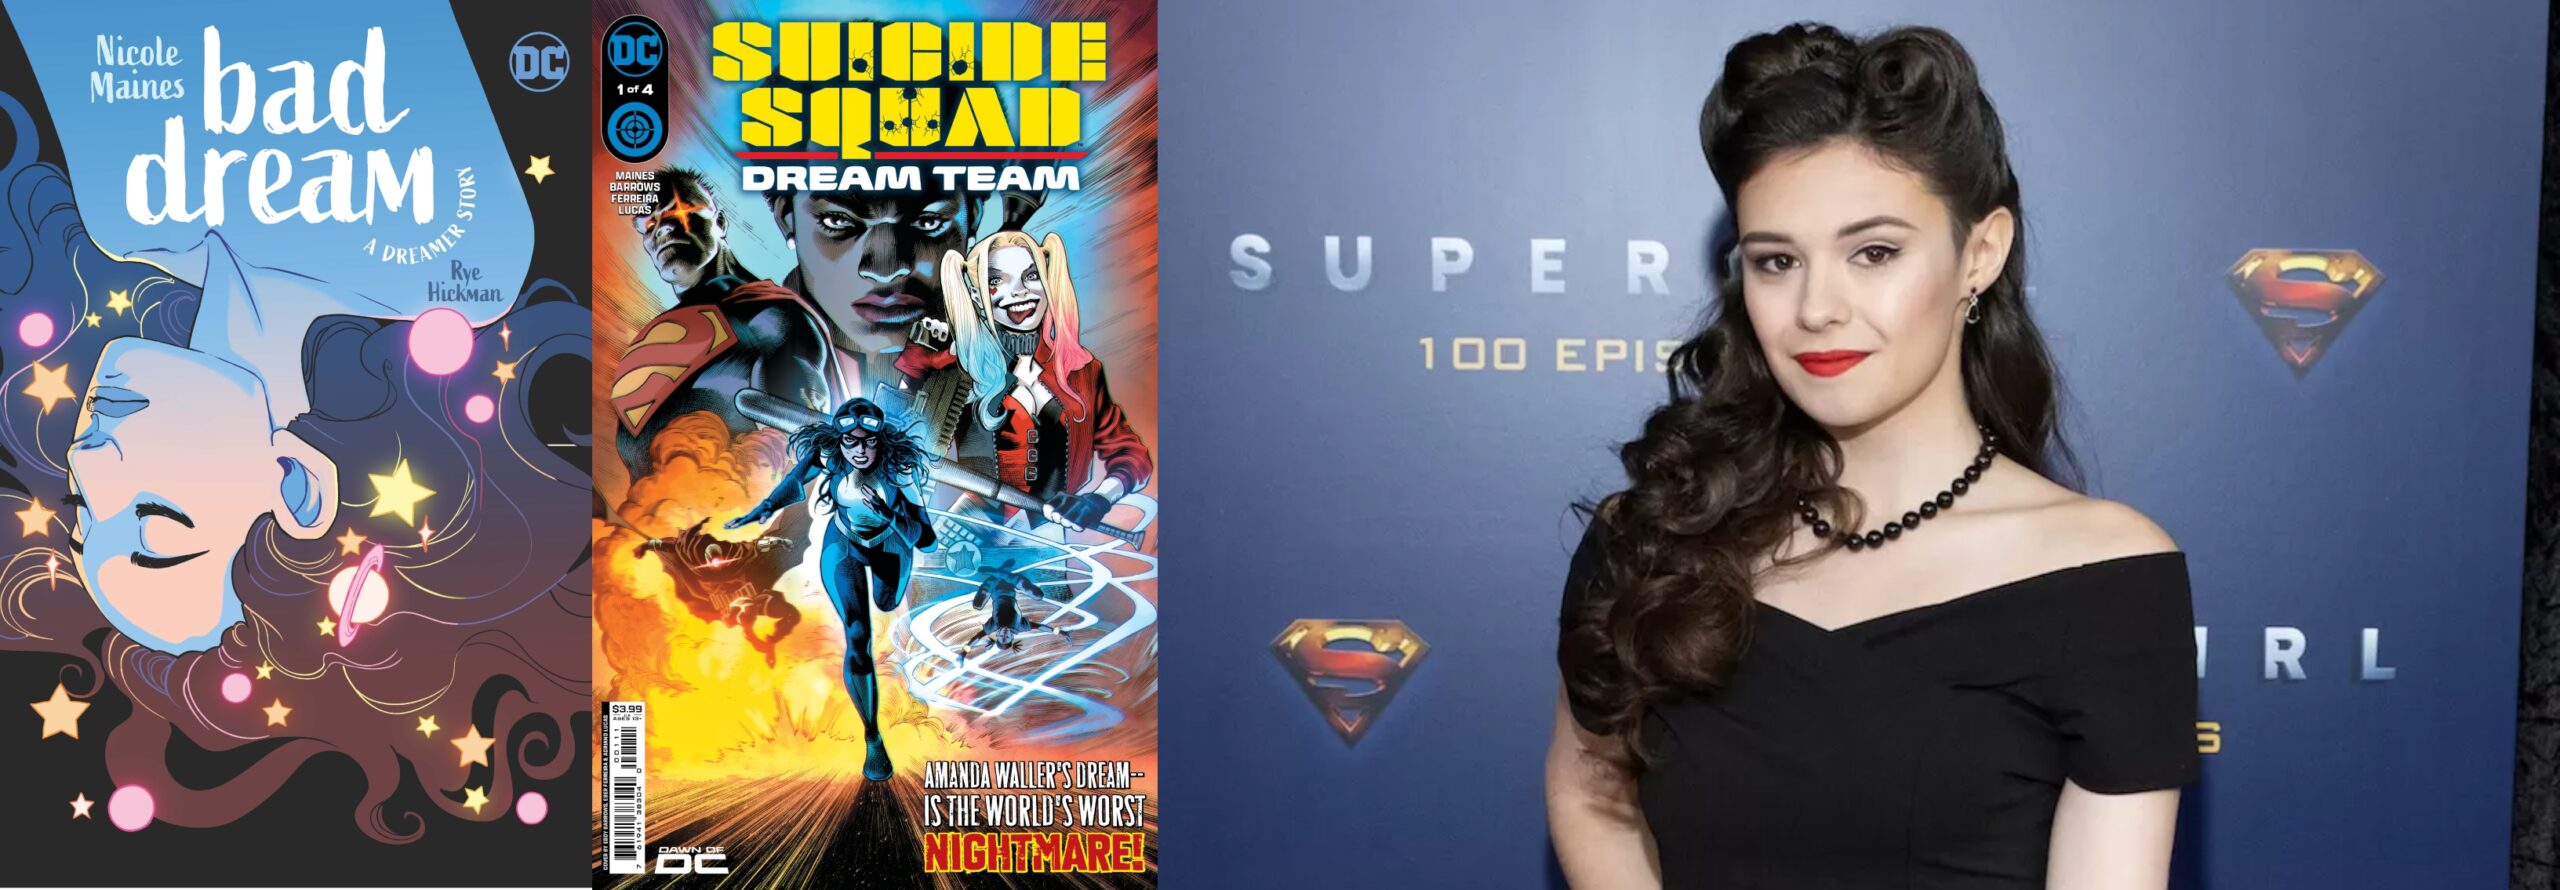 Bad Dream and Suicide Squad Dream Team Preview with Nicole Maines: The Comic Source